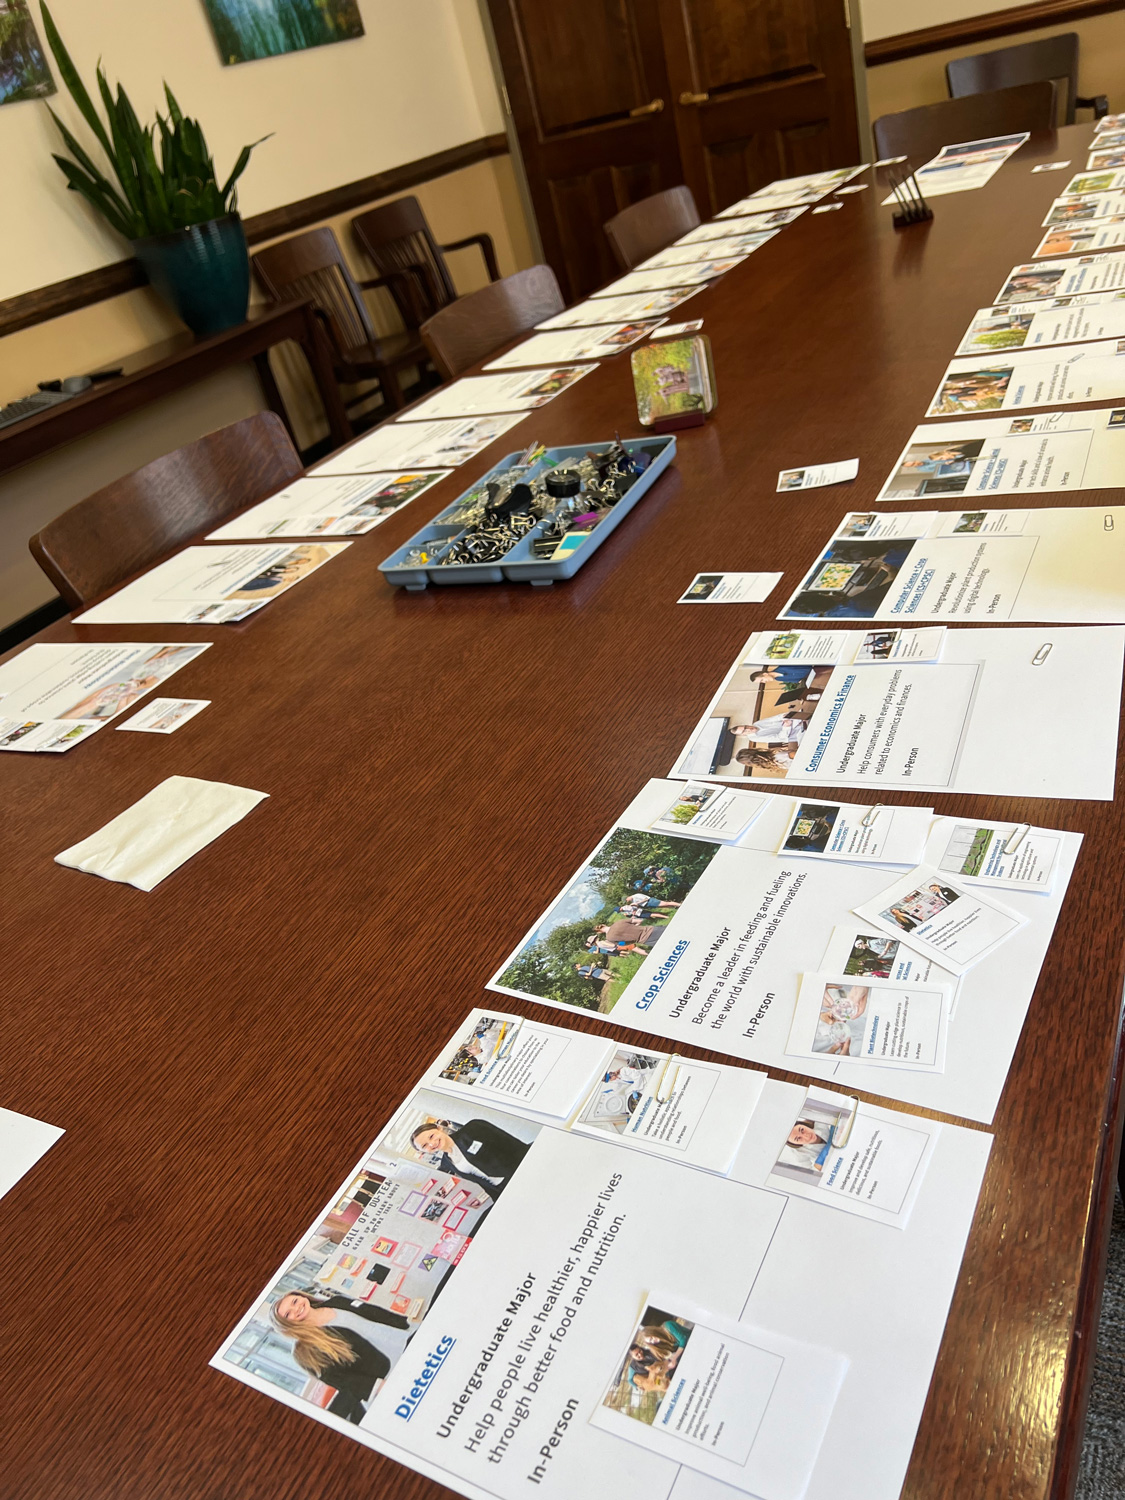 Printed version of major cards laid out on conference table ready to be edited